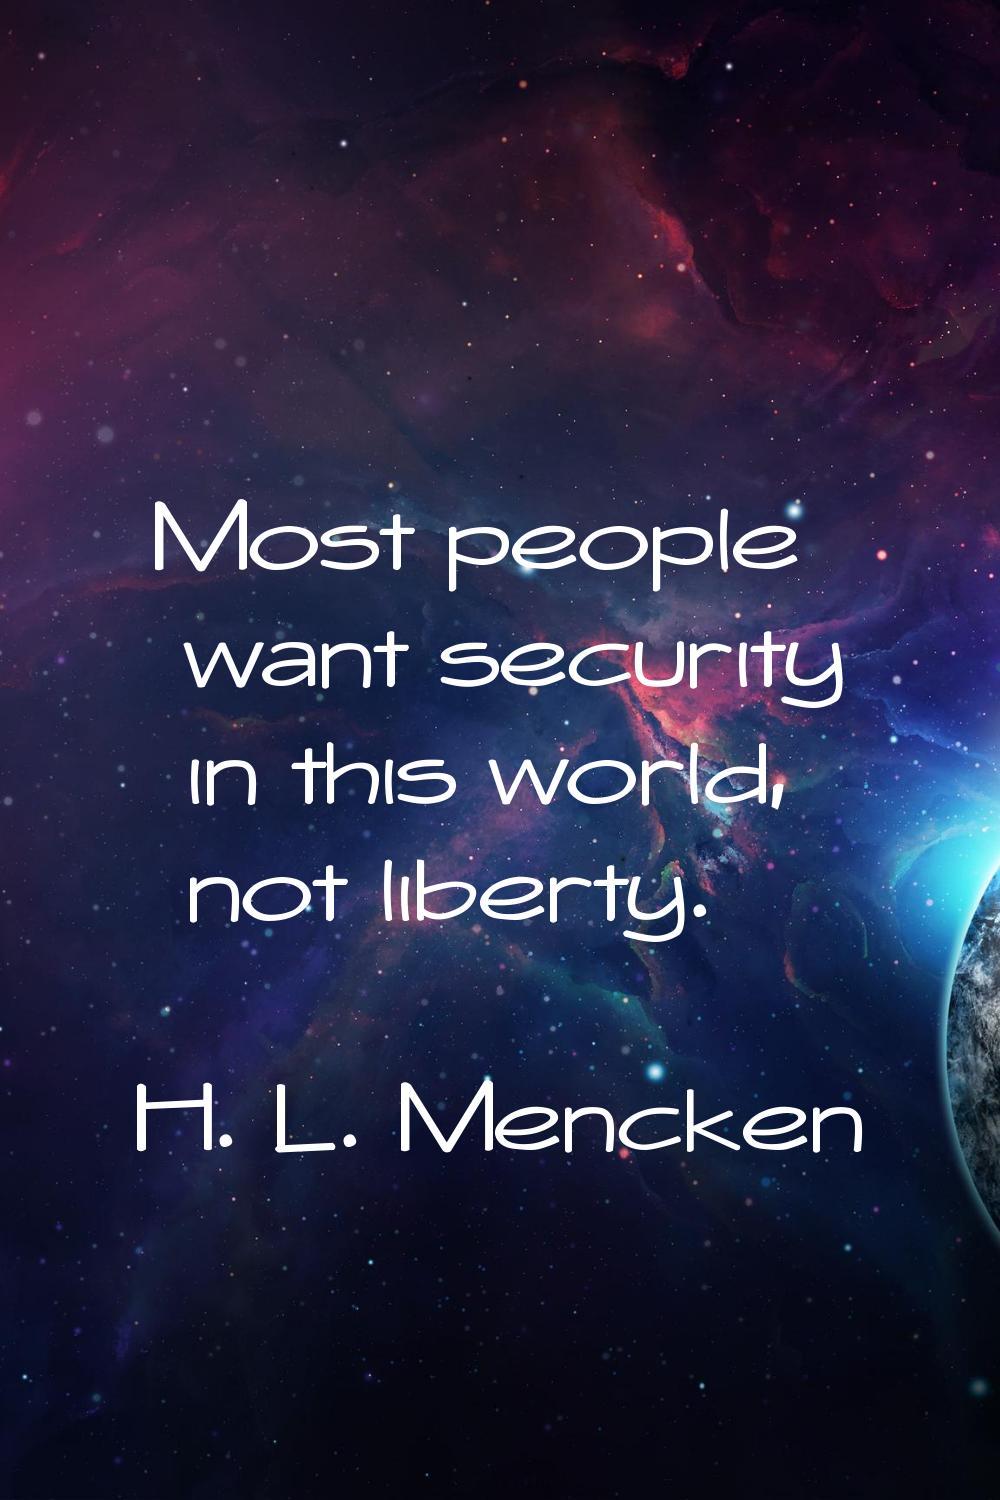 Most people want security in this world, not liberty.